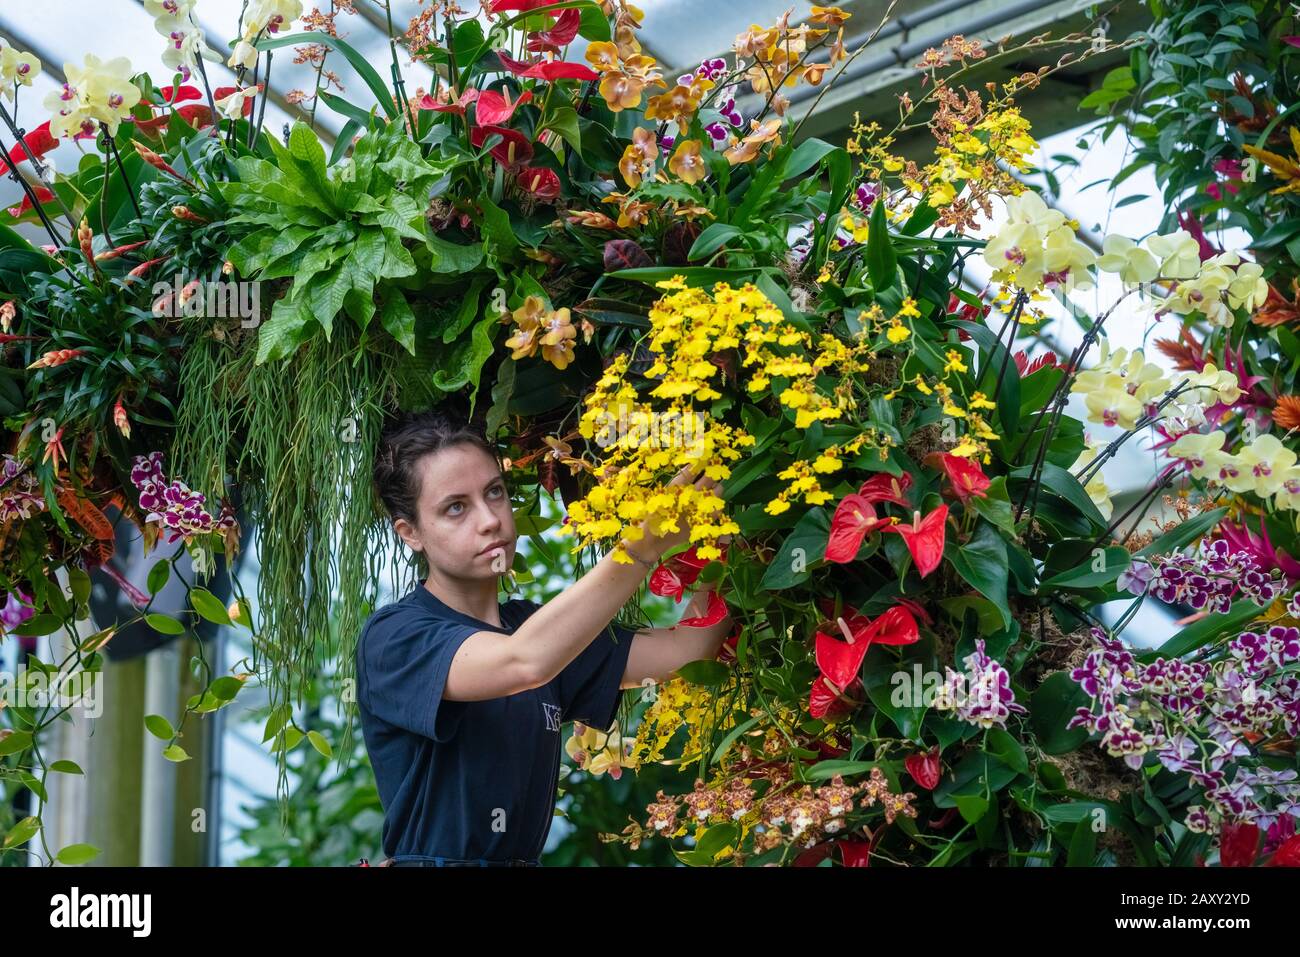 Kew Orchid Festival 2020: Indonesia. Annual orchid festival themed on the country of Indonesia sees over 5,000 colourful orchid and tropical plants. Stock Photo